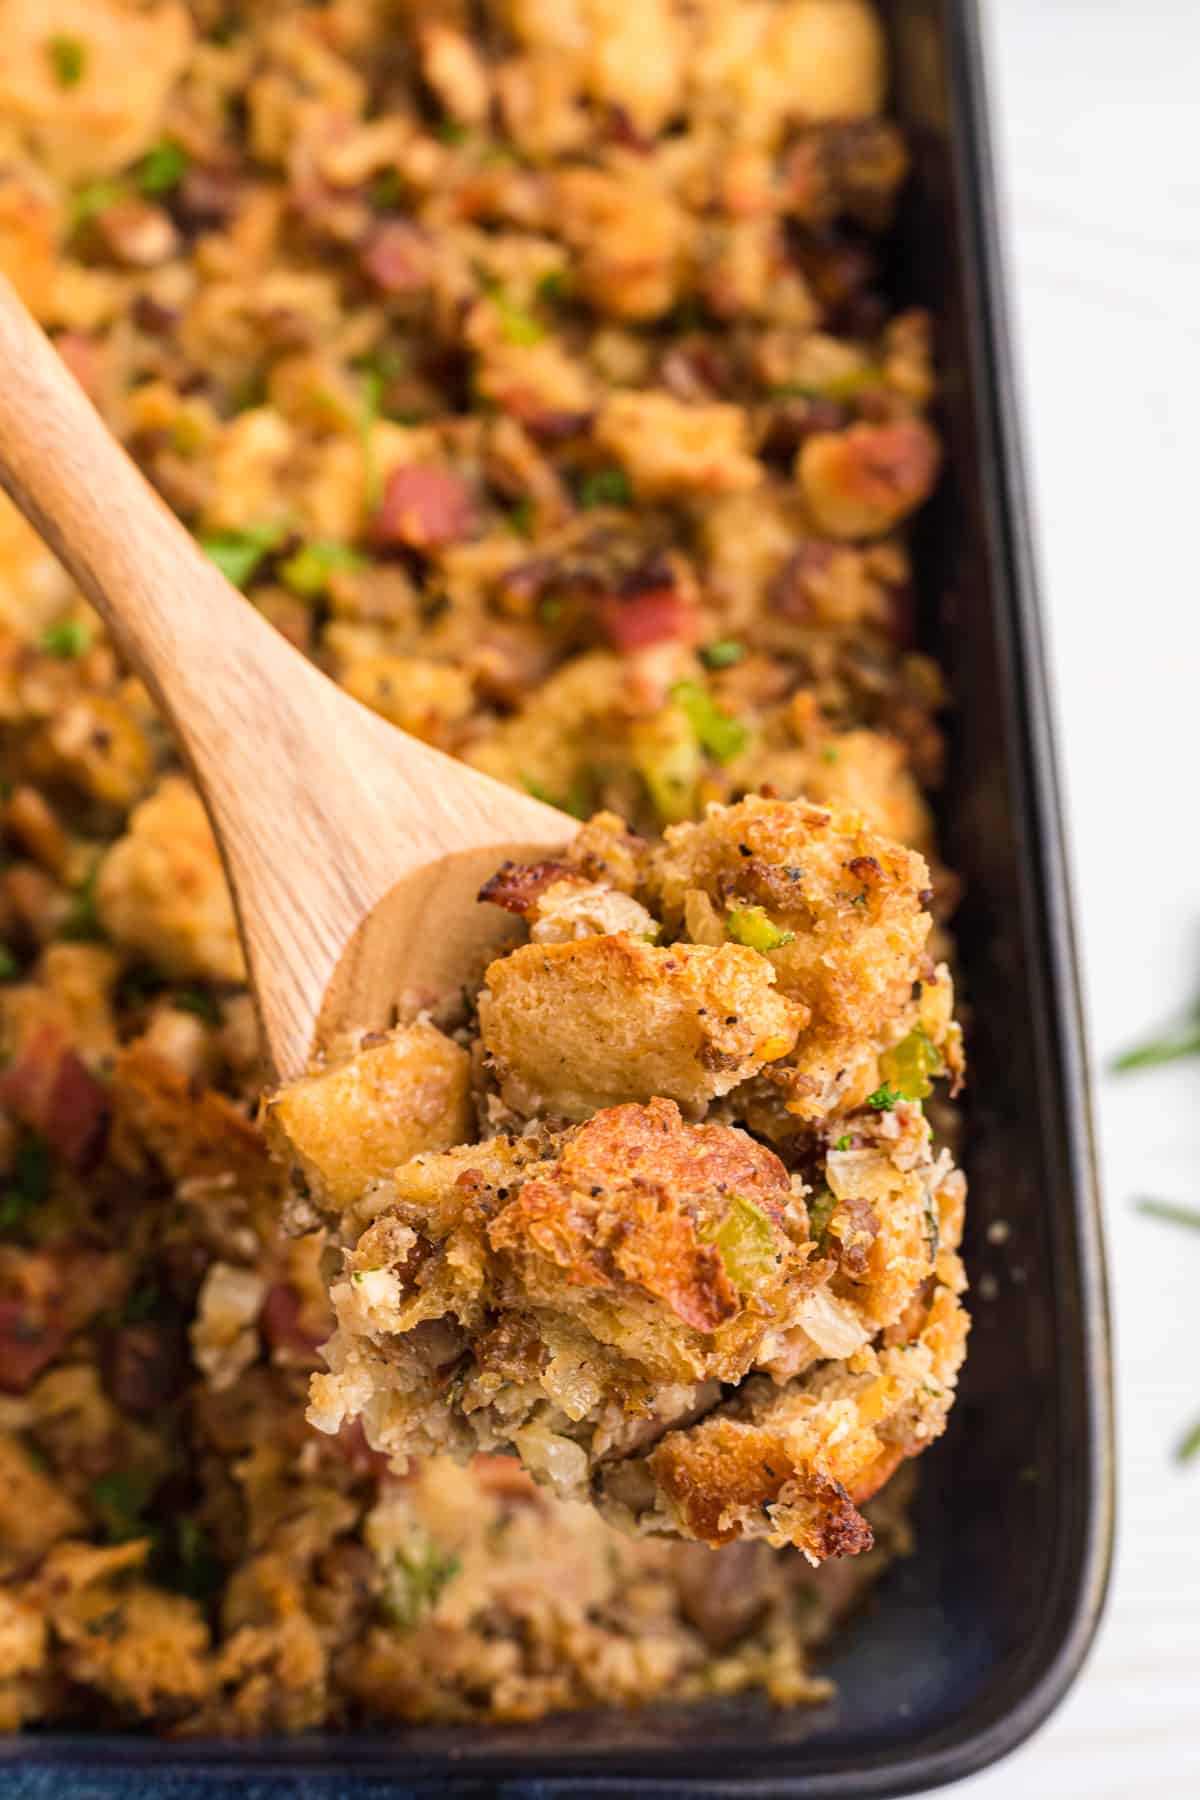 Some stuffing is being lifted from the baking dish with a wooden spoon.